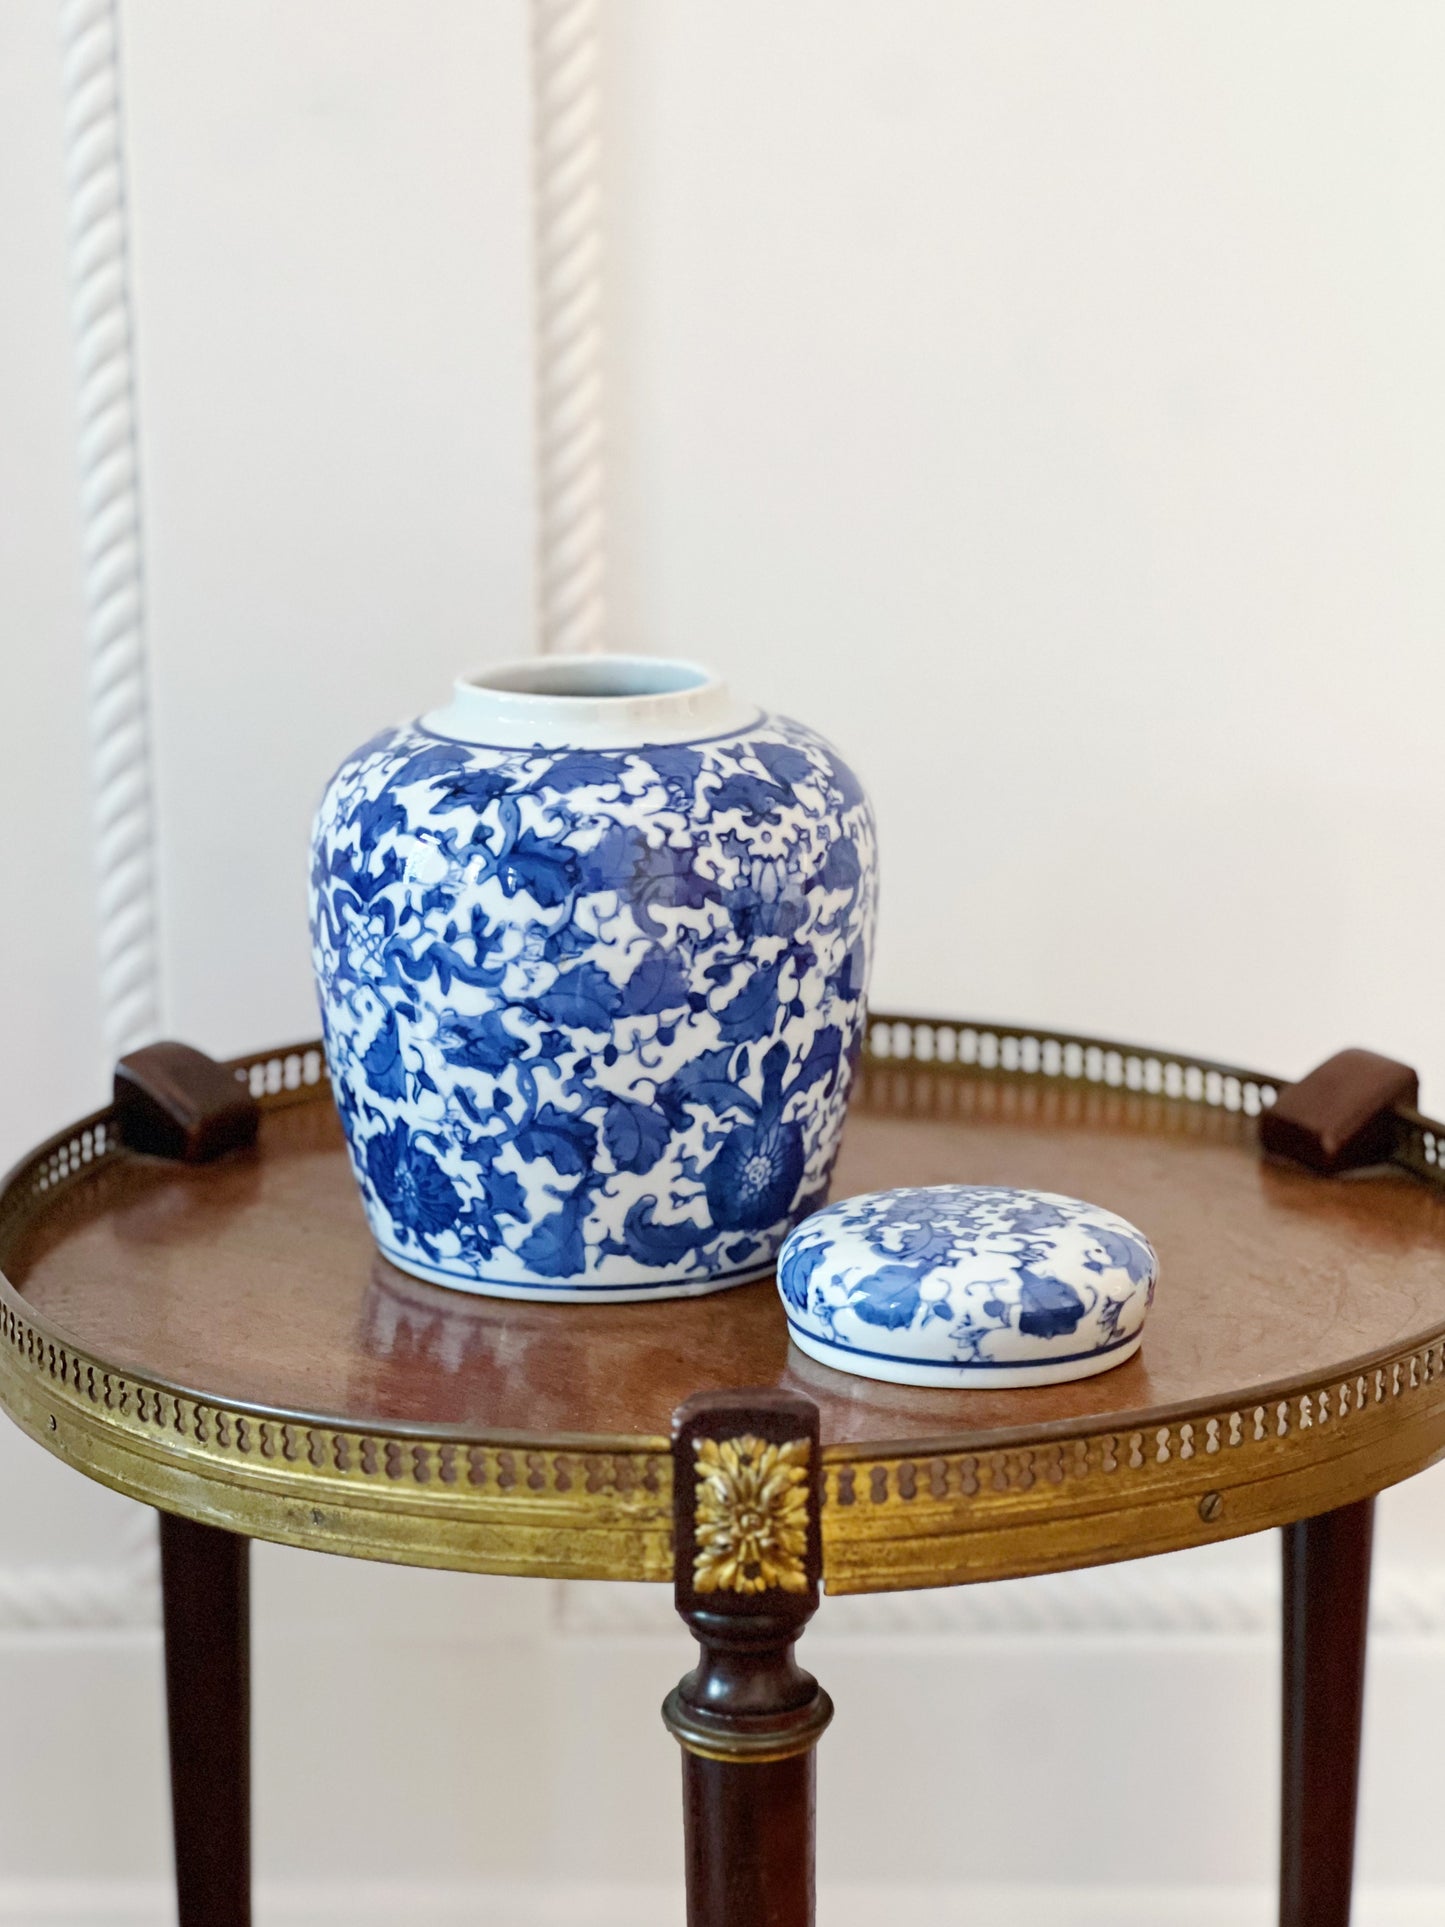 scrolling peonies blue and white ginger jar with lid off on wooden table